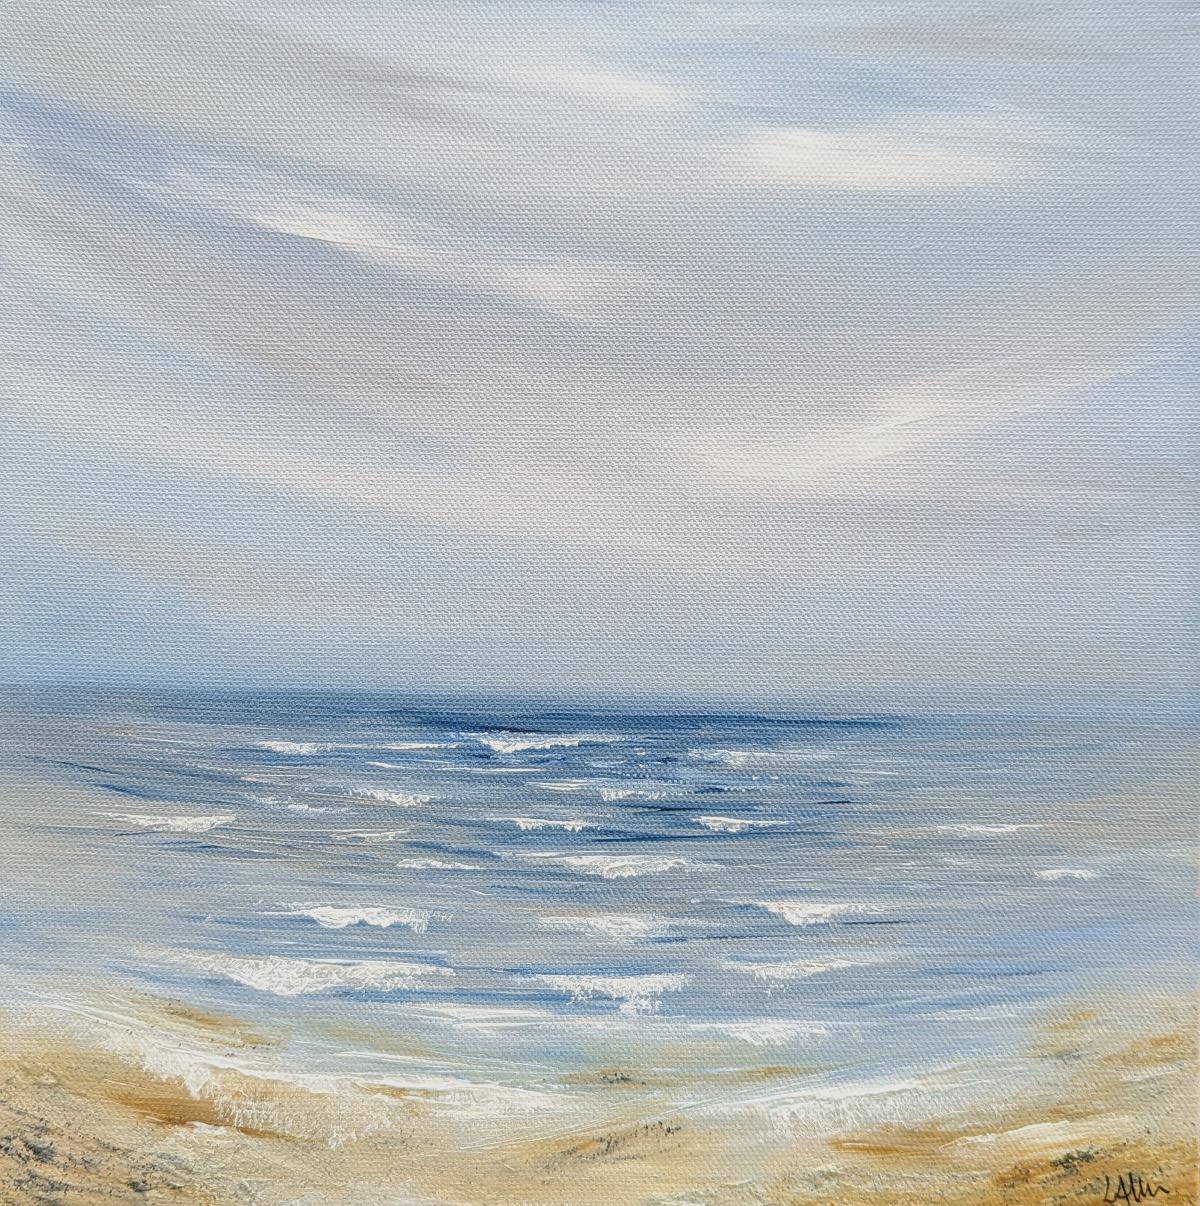 The Calm Before The Storm #3 - An seascape painting by Lucy Moore. When winter roles in it slowly strips the earth of her colour and vibrancy, the grey storm clouds creep along the sky threating rain and snow. . This piece would make a great